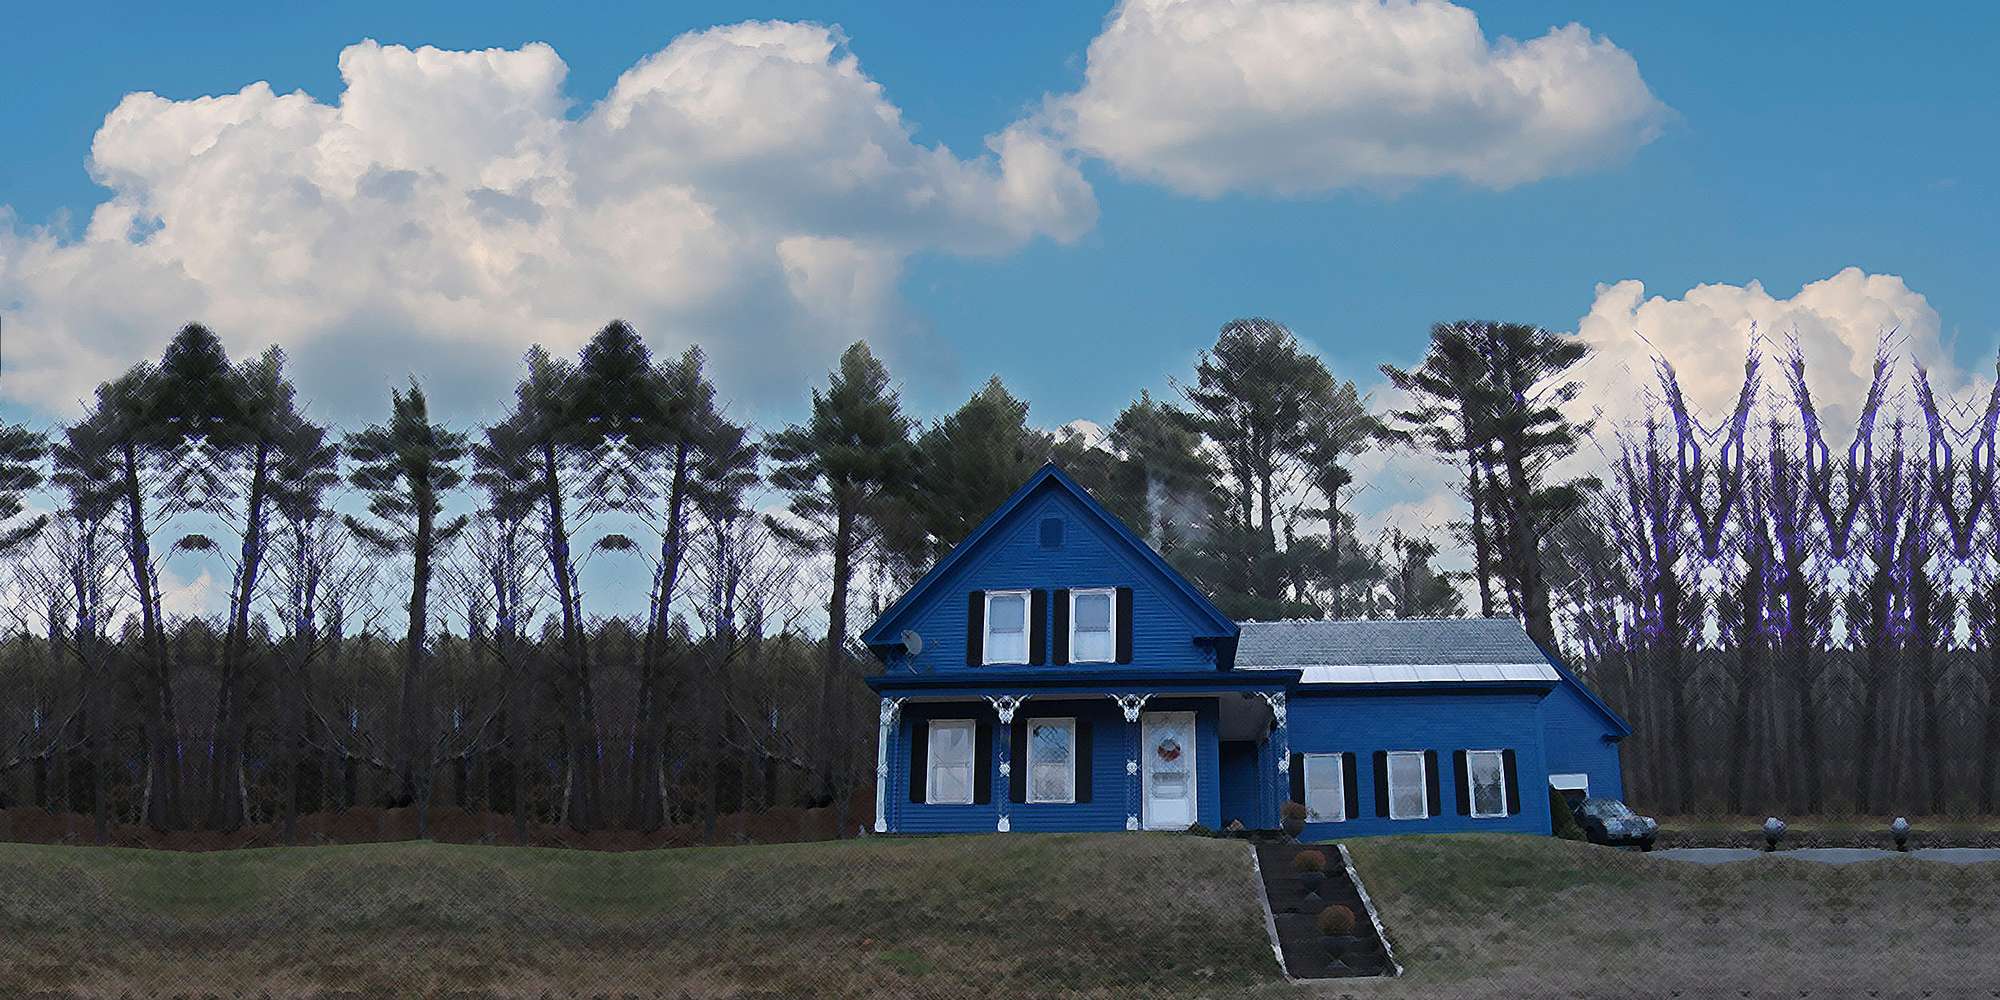 Photo of the Blue House